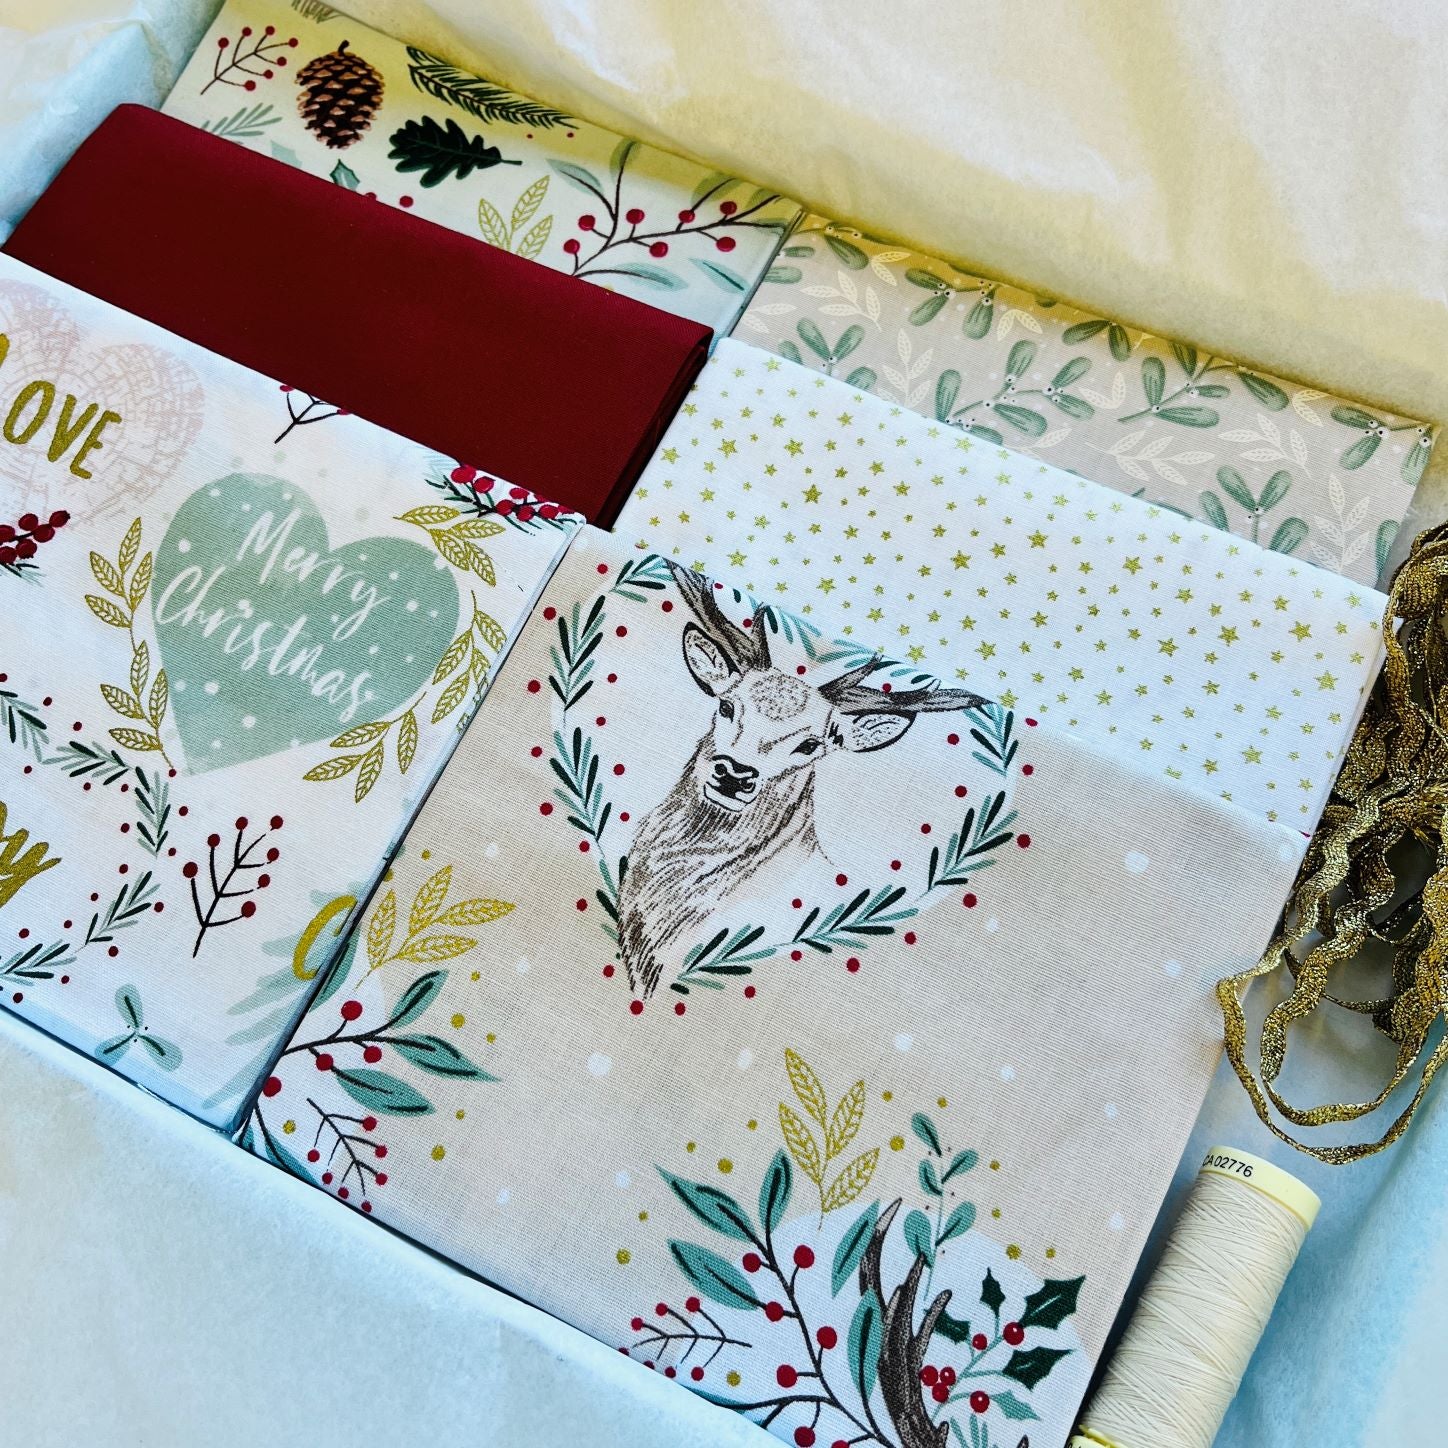 Deluxe Monthly Fabric Subscription Box | Sewing Subscription – My ...